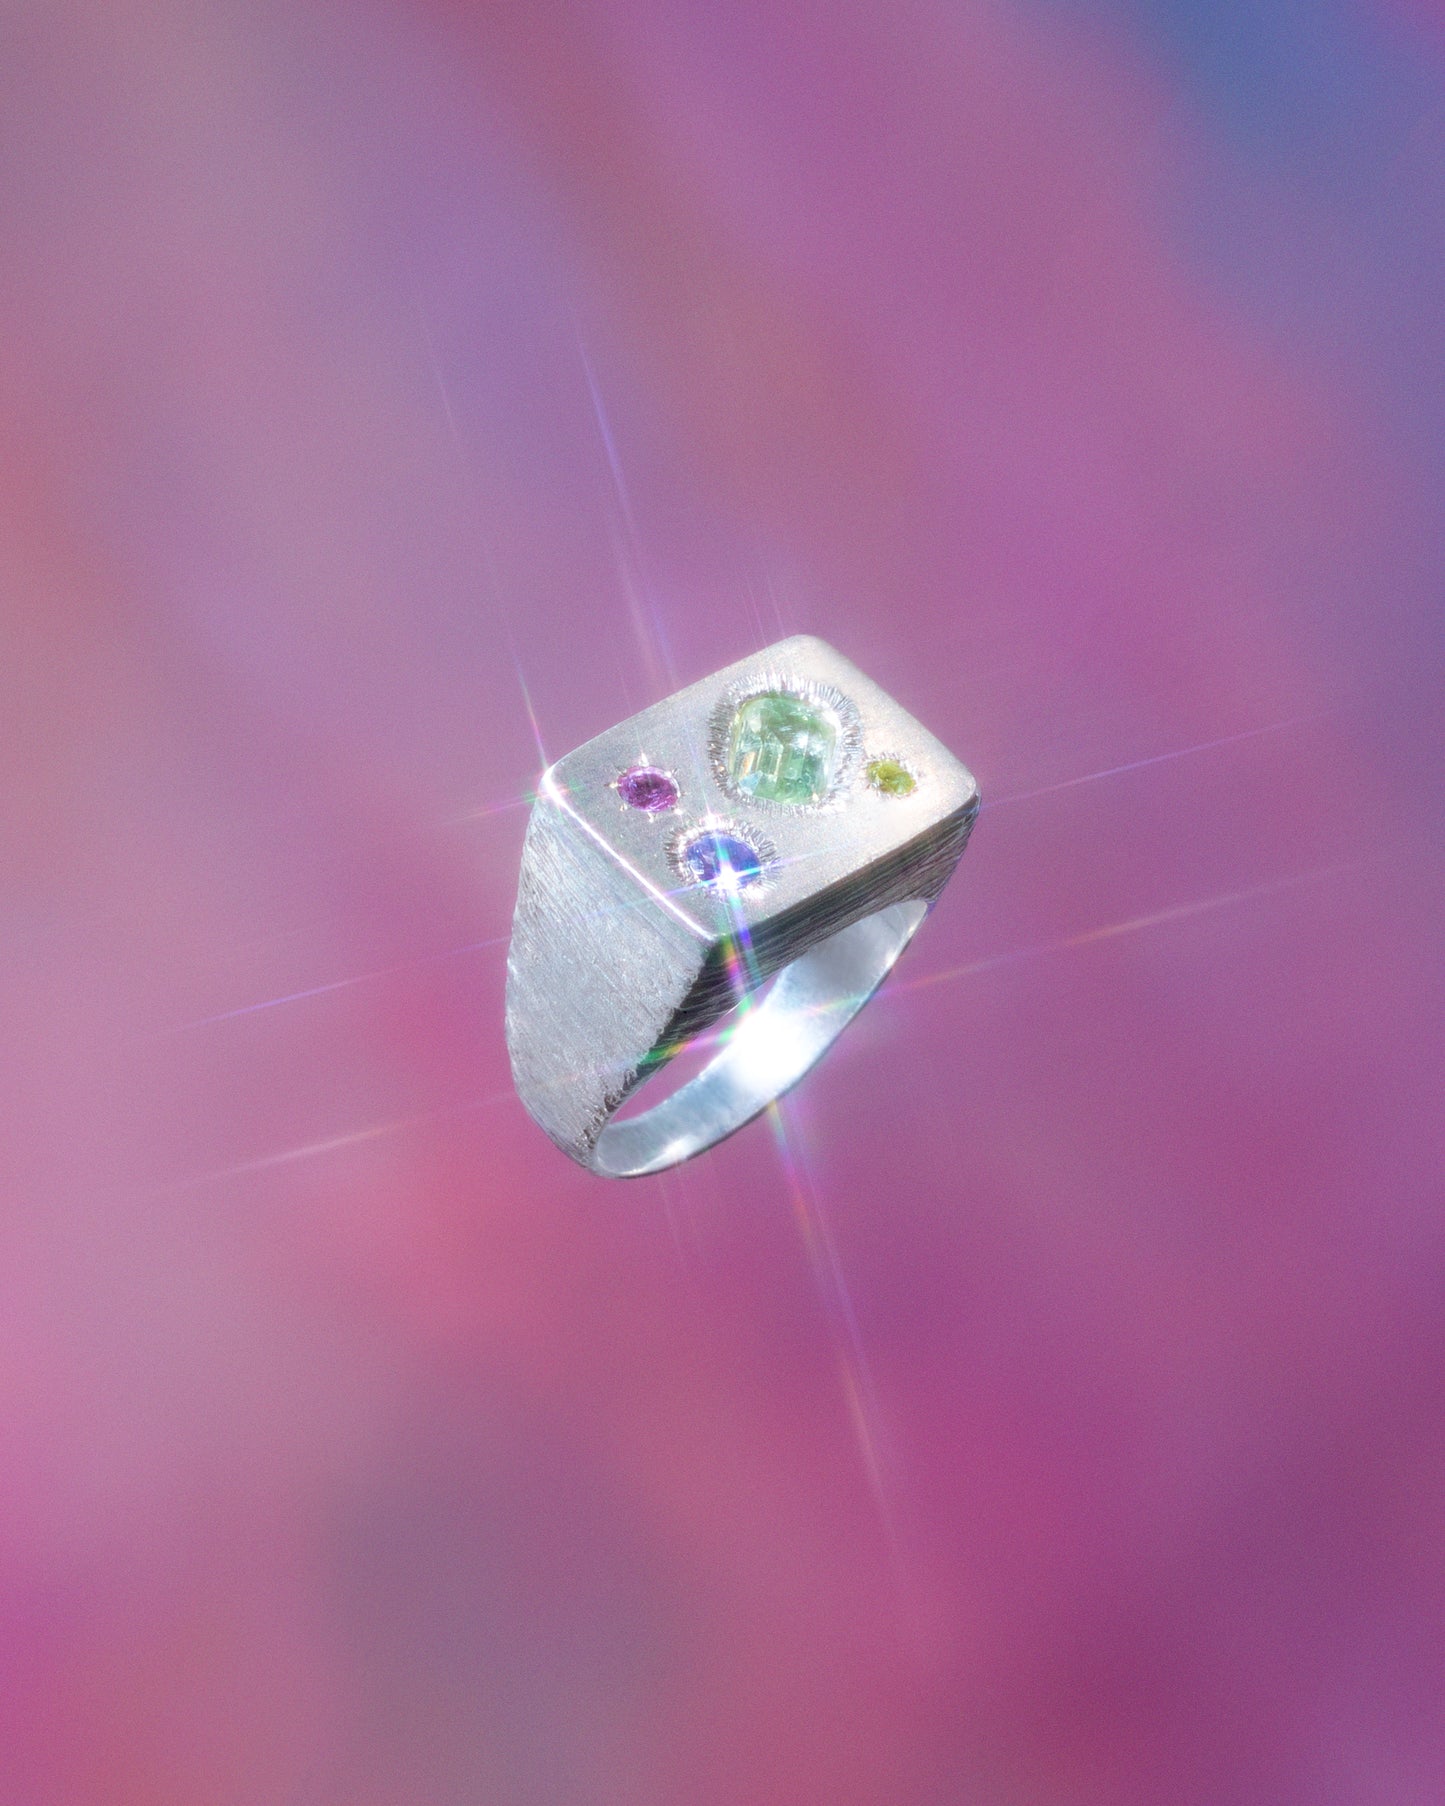 A rough but precious rectangular signet in sterling silver set with a mint-green tourmaline, a peridot, a tanzanite and a rhodolite garnet. Hand sculpted by Violette Stehli. Photo by Julia Grandperret Motin.